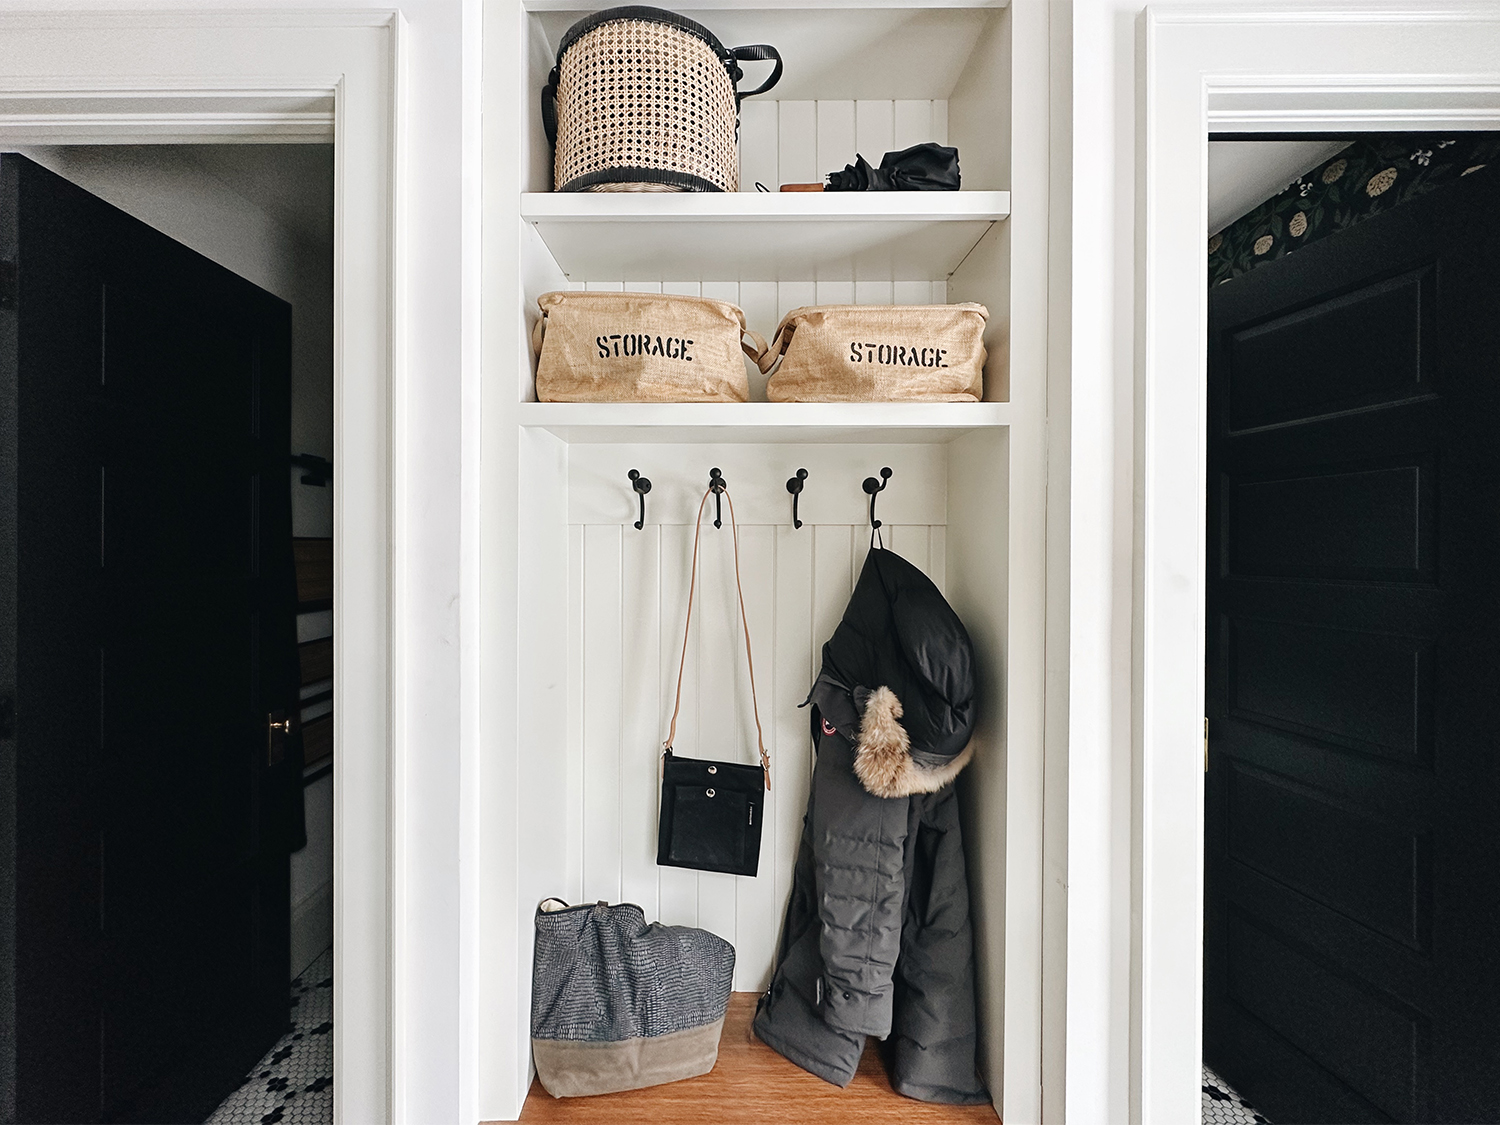 Mudroom Built in For Coats with symmetrical Doors on either side